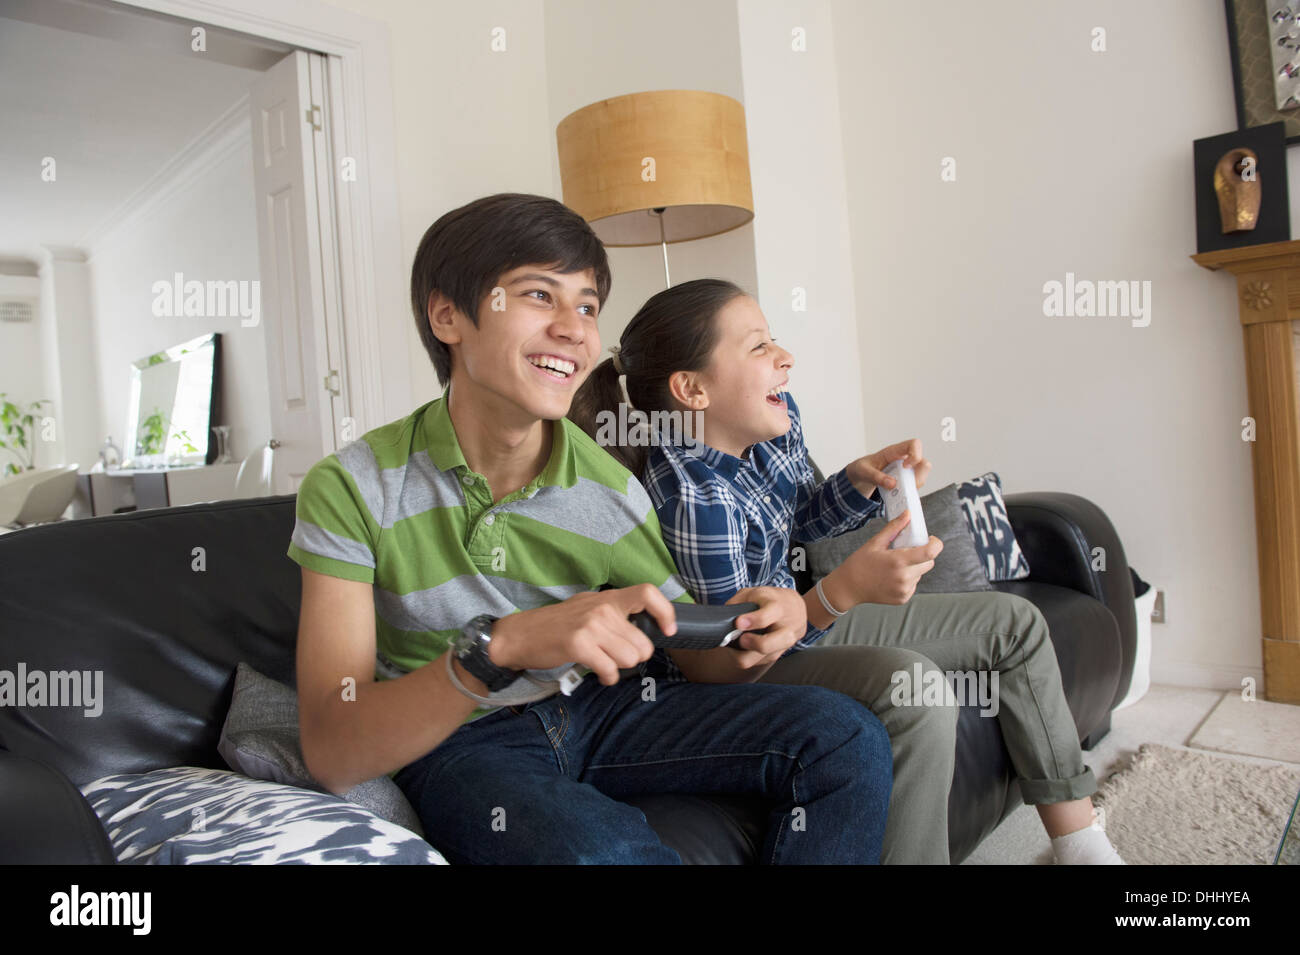 Brother and sister playing video game Stock Photo